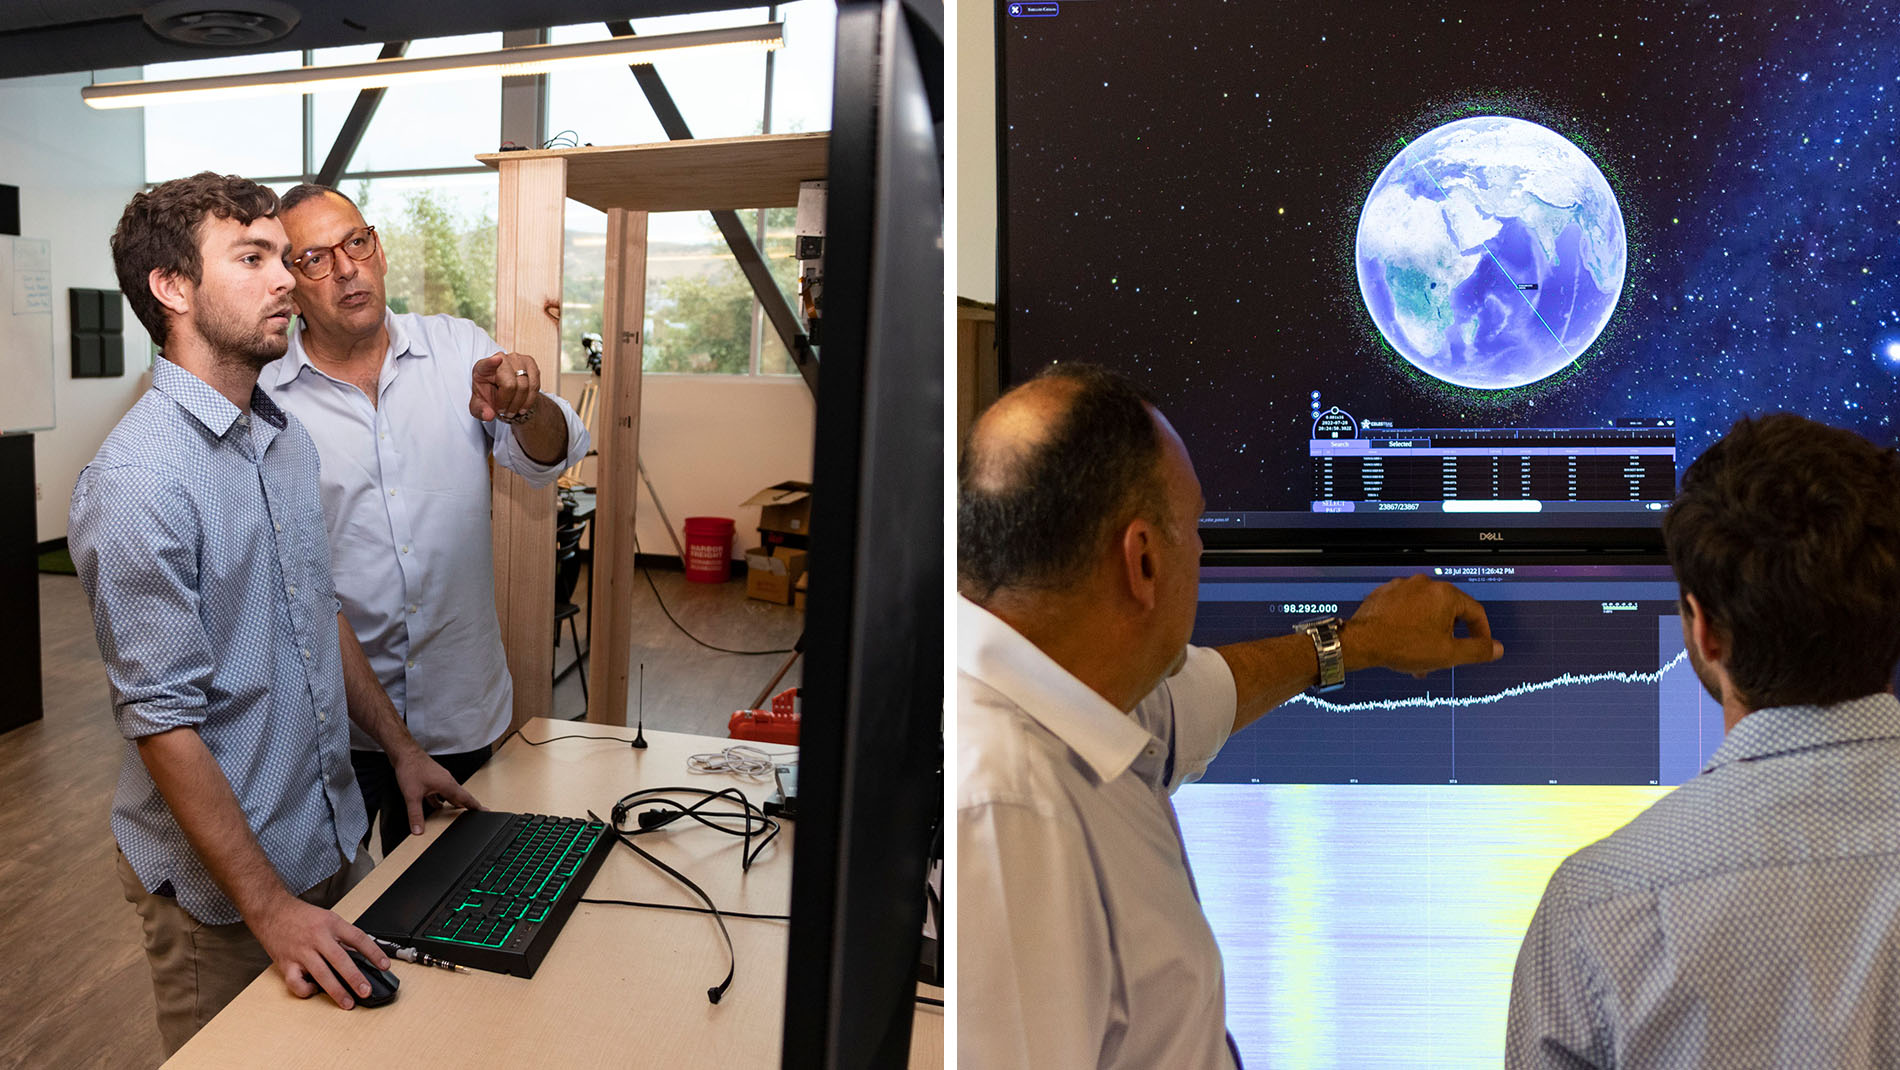 Two men look at a monitor displaying the planet Earth.